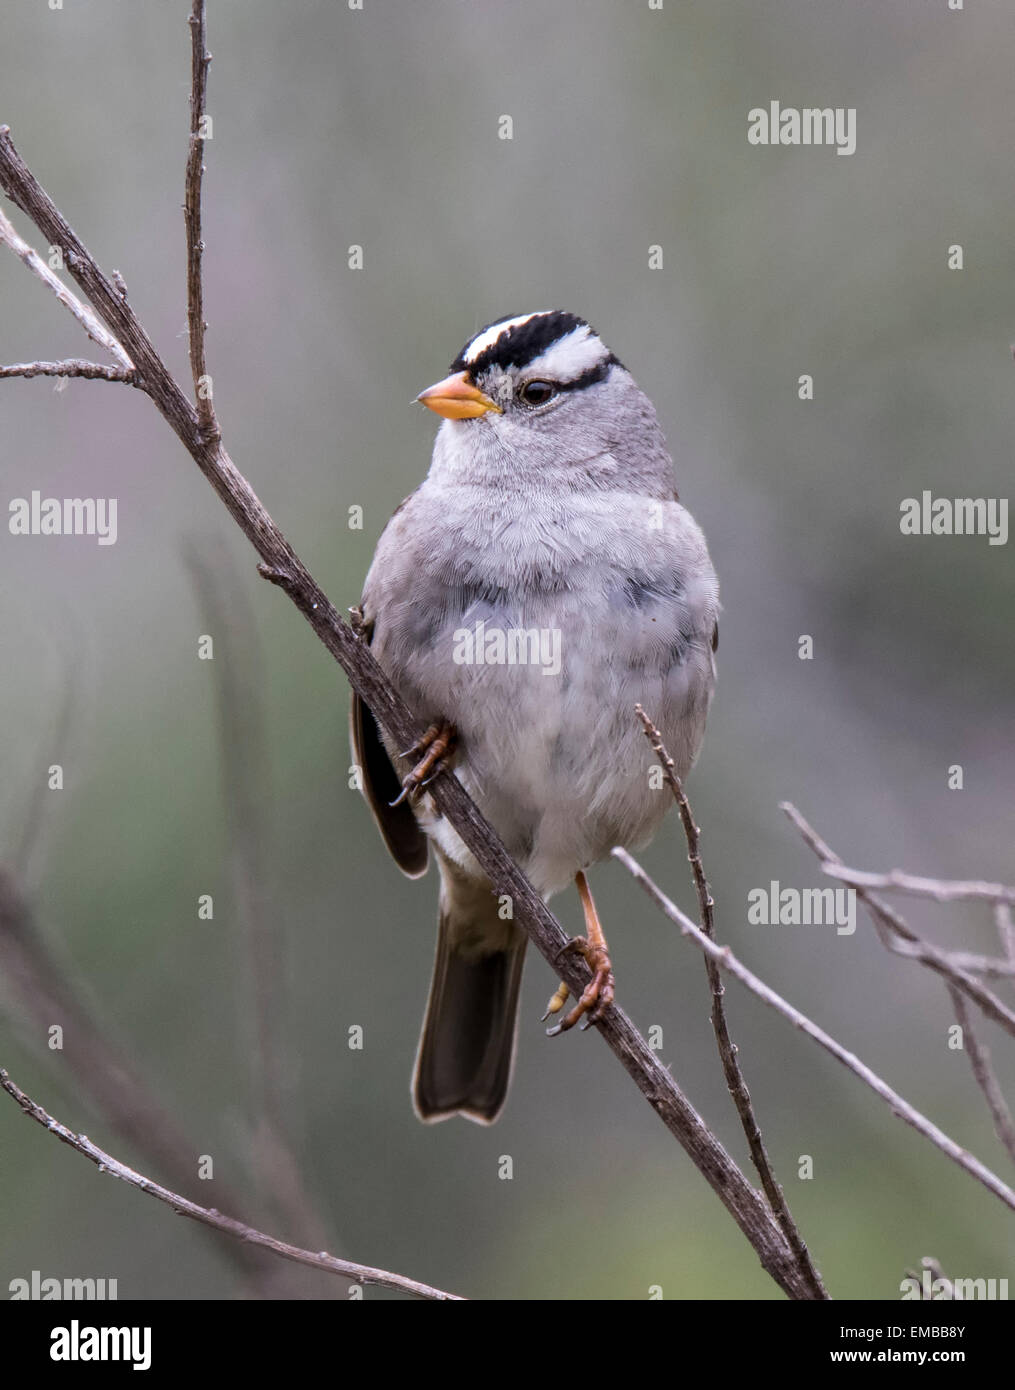 WHITE-CROWNED SPARROW (Zonotrichia leucophrys) perched on some twigs. Stock Photo